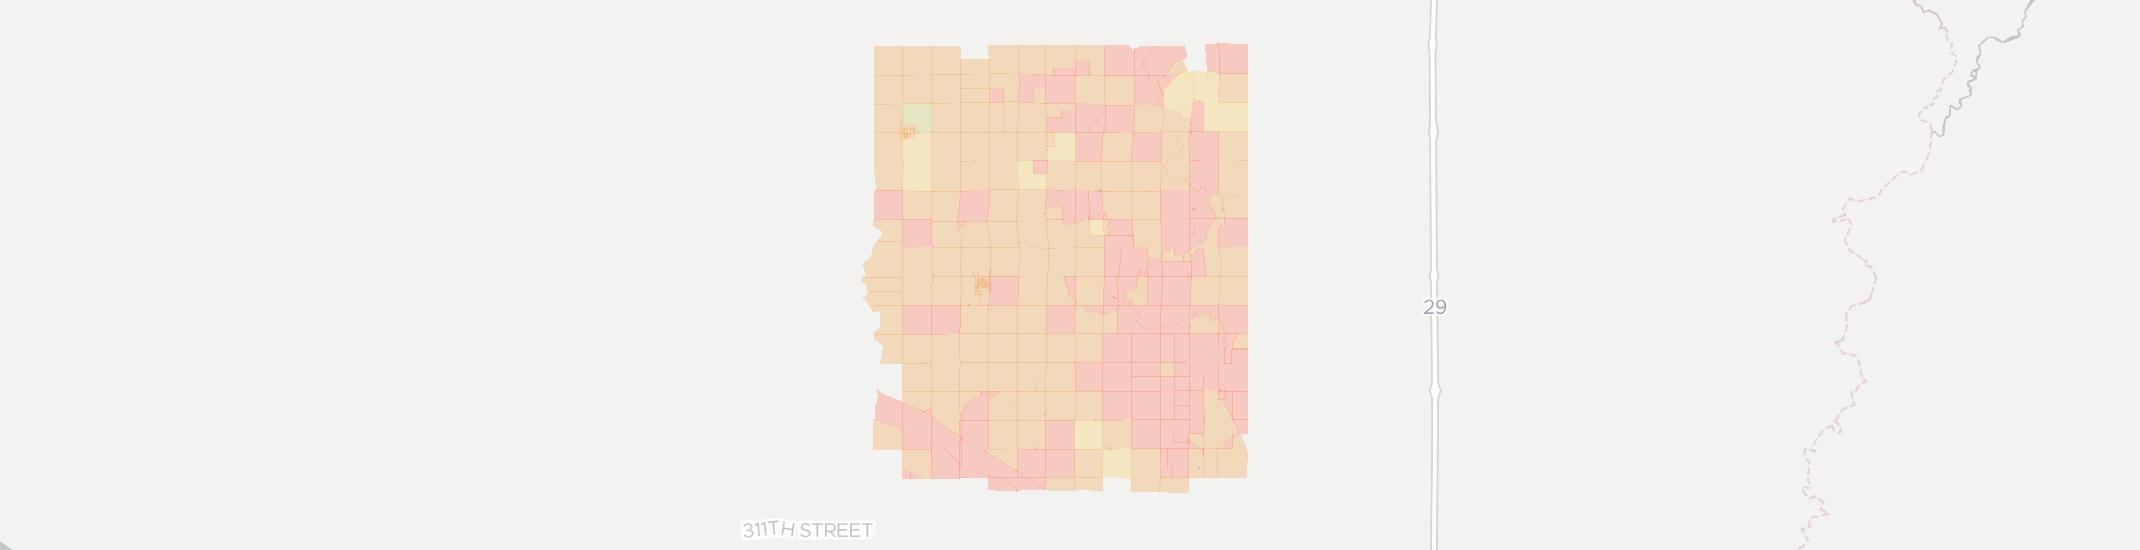 Wakonda Internet Competition Map. Click for interactive map.